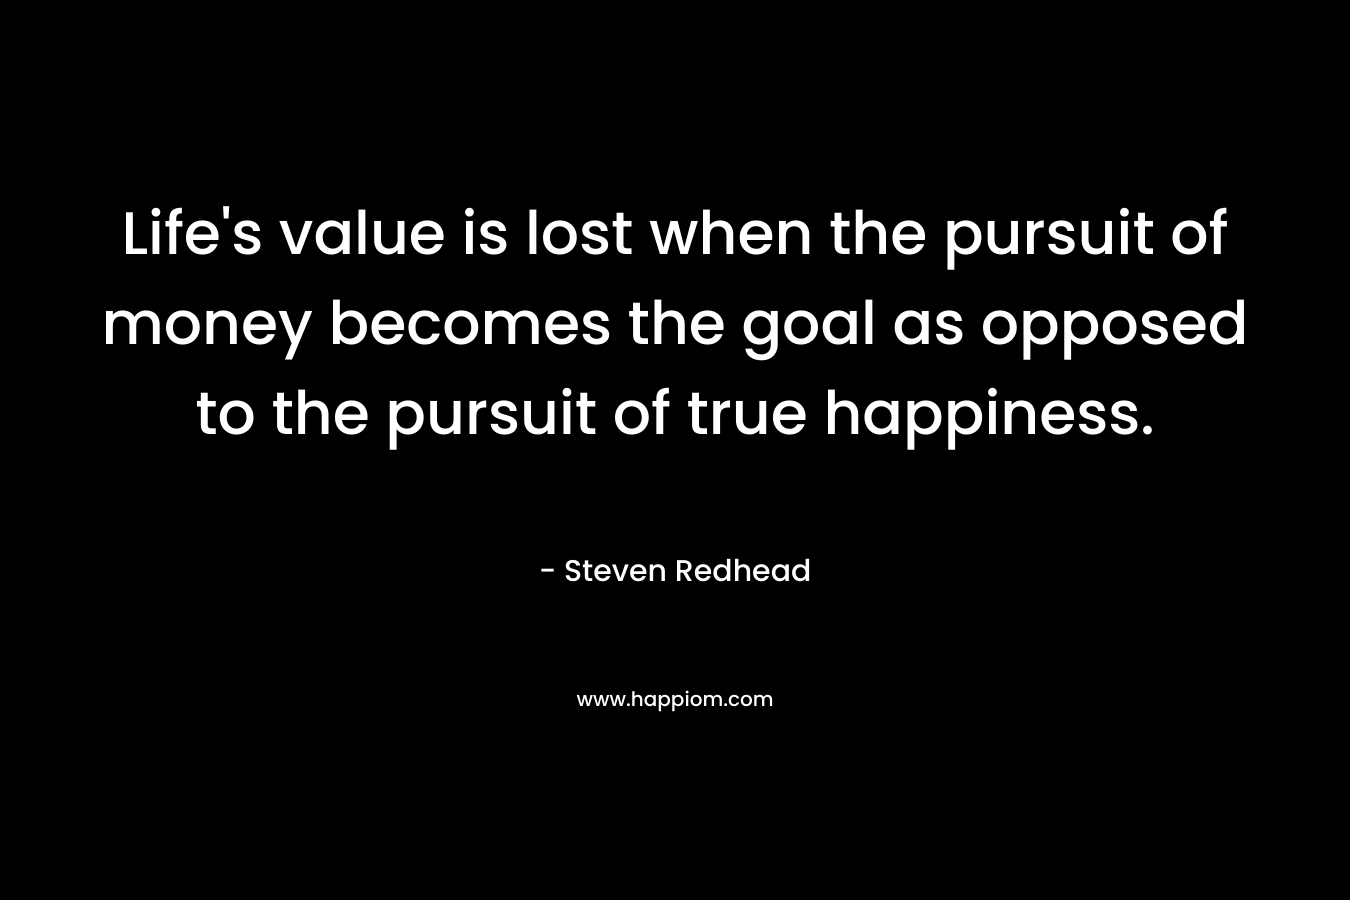 Life's value is lost when the pursuit of money becomes the goal as opposed to the pursuit of true happiness.